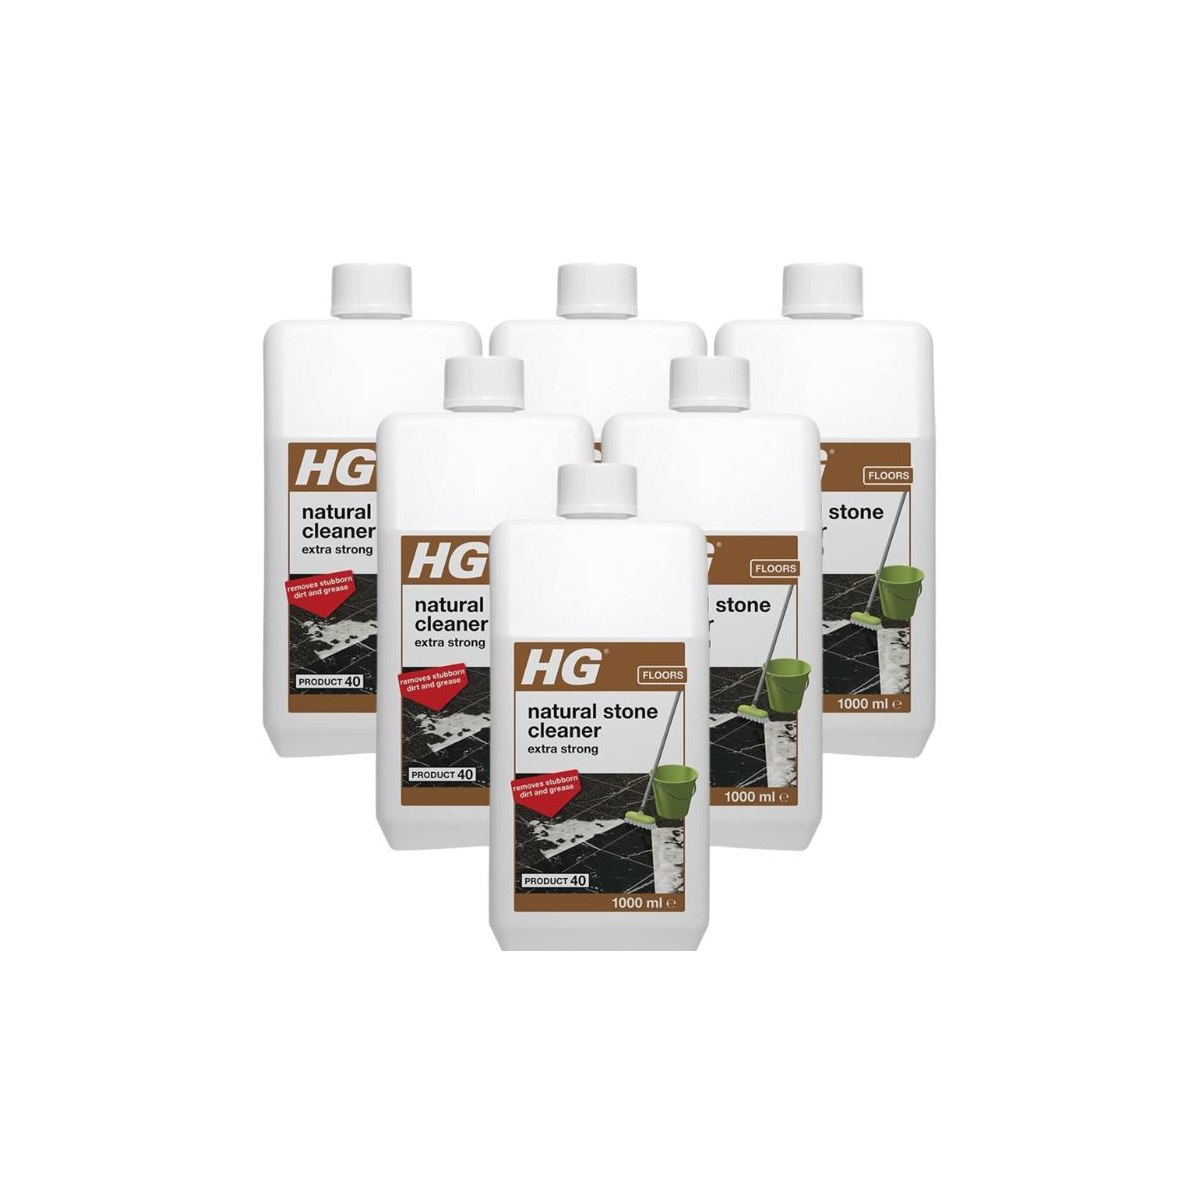 Case of 6 x HG Natural Stone Cleaner Extra Strong 1 Litre Product 40